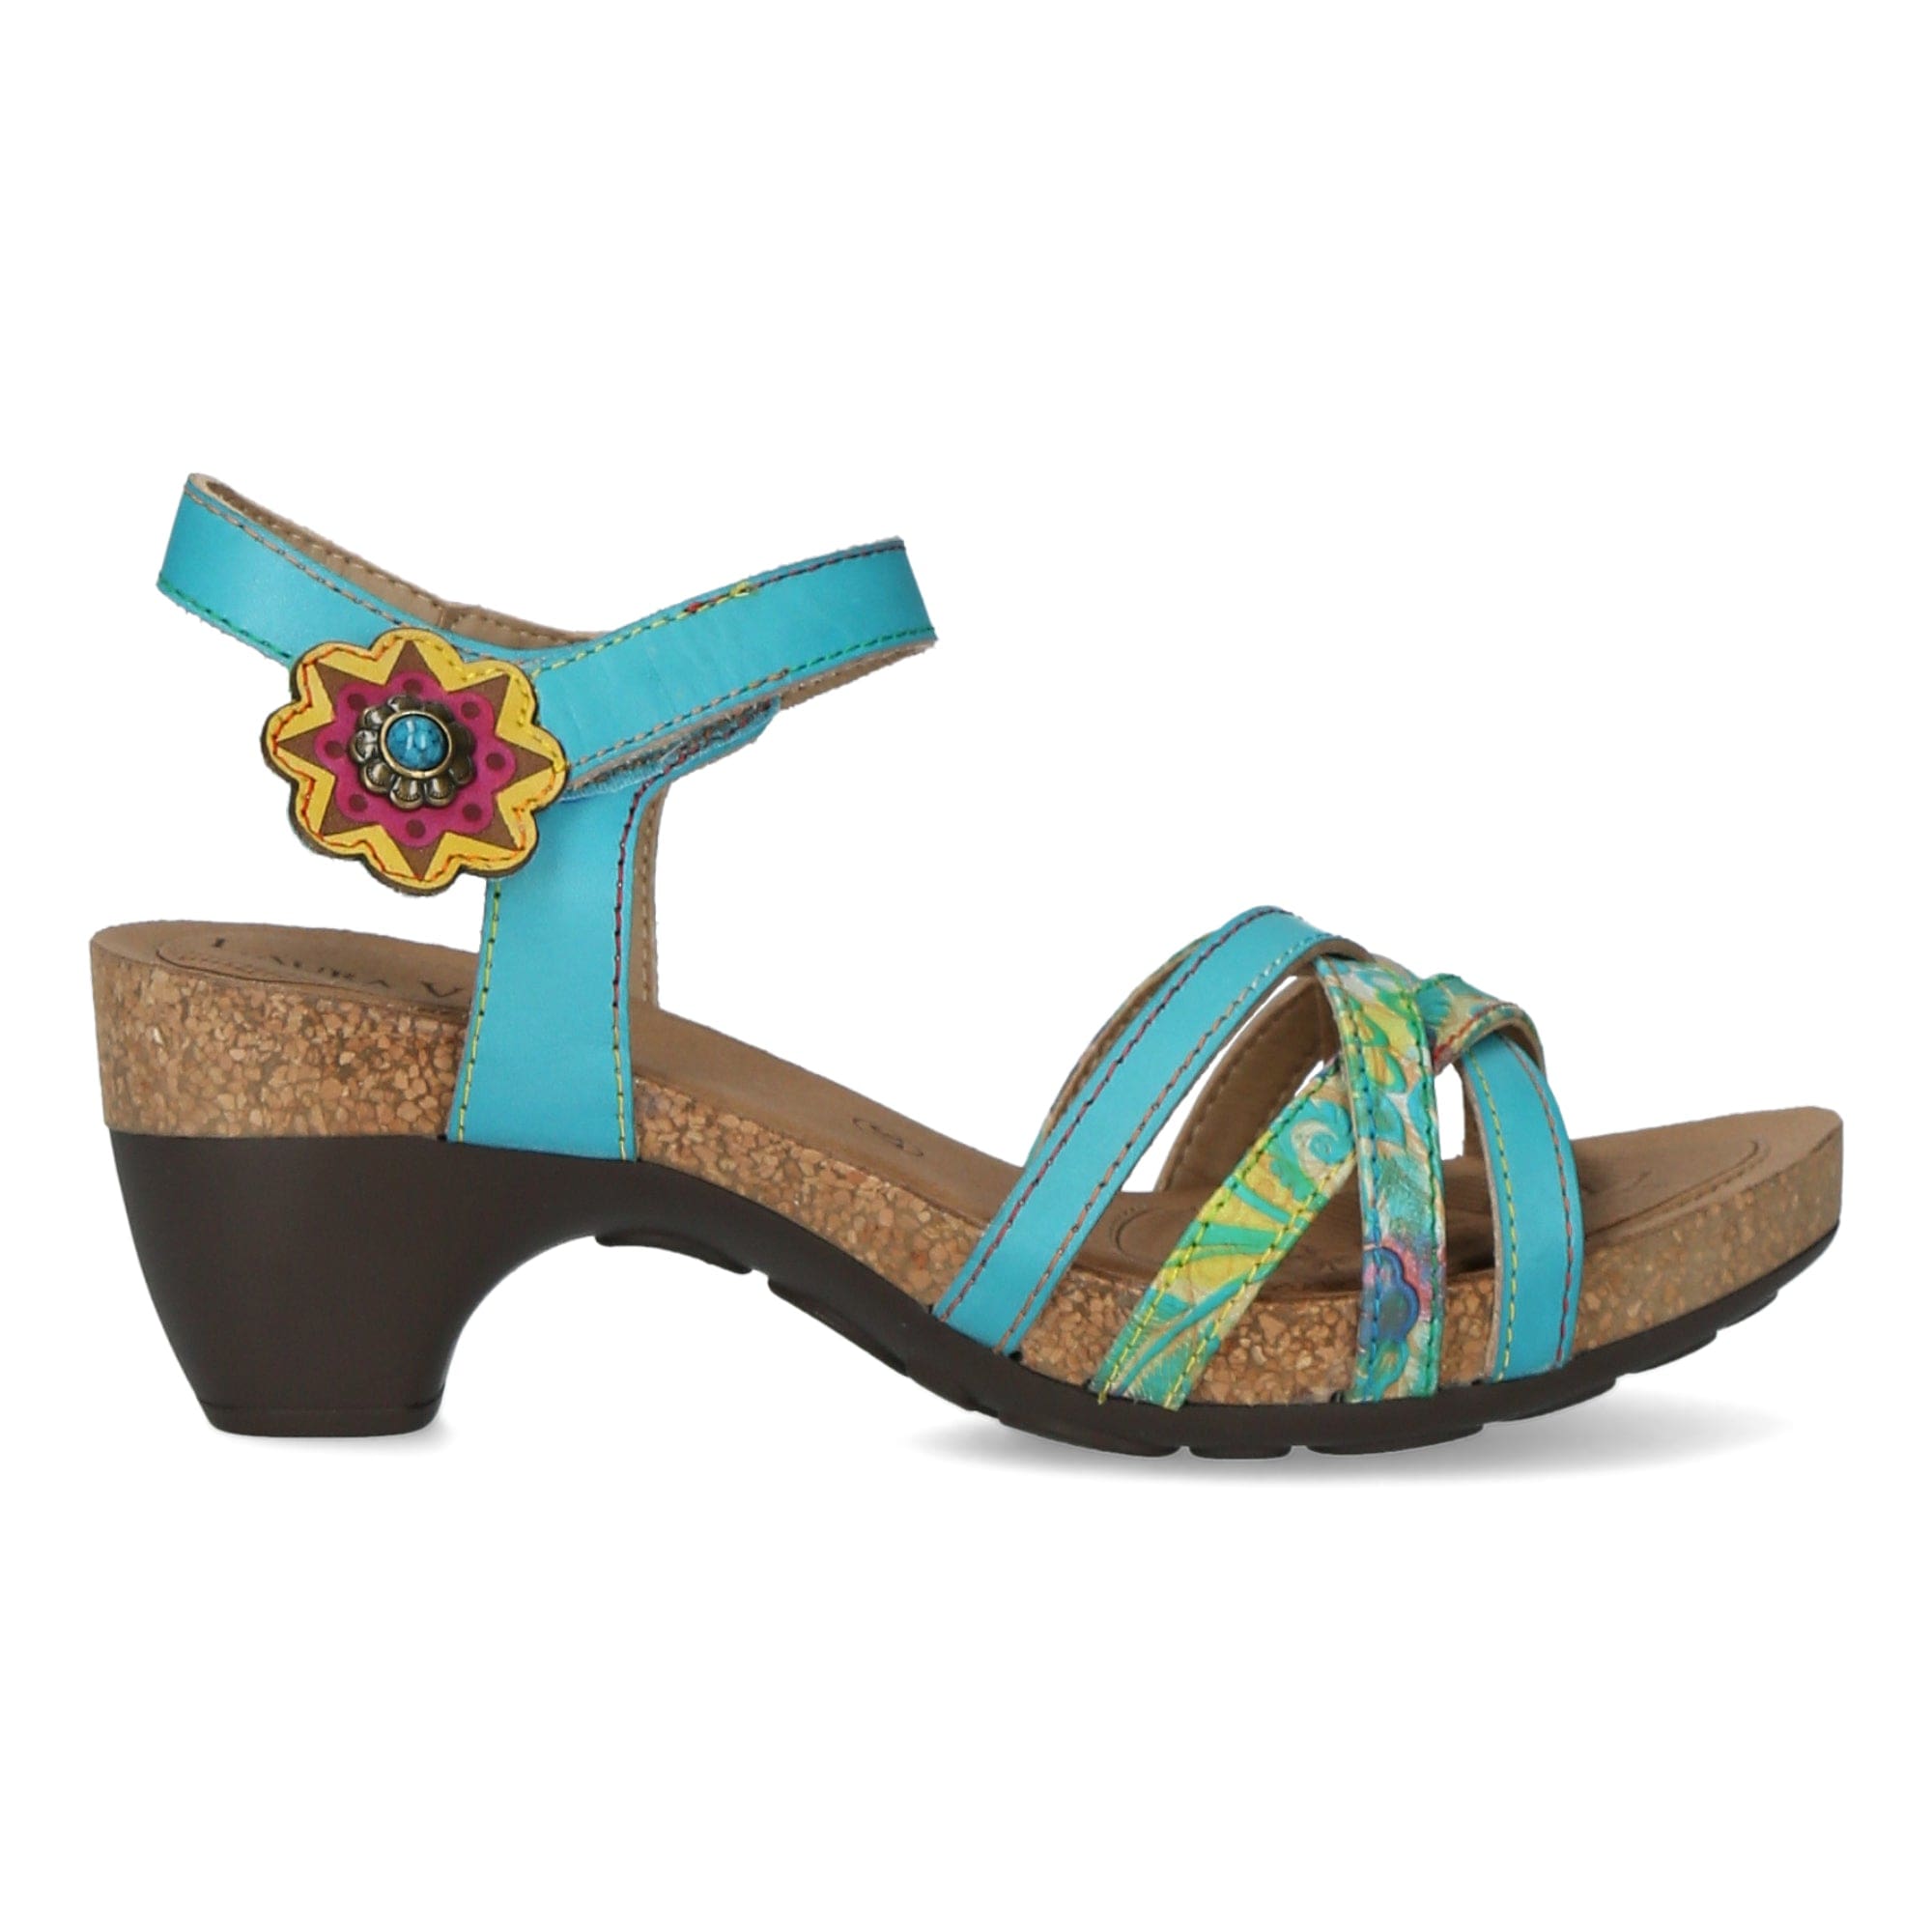 Chaussures LANO 06 - 35 / Turquoise - Sandale